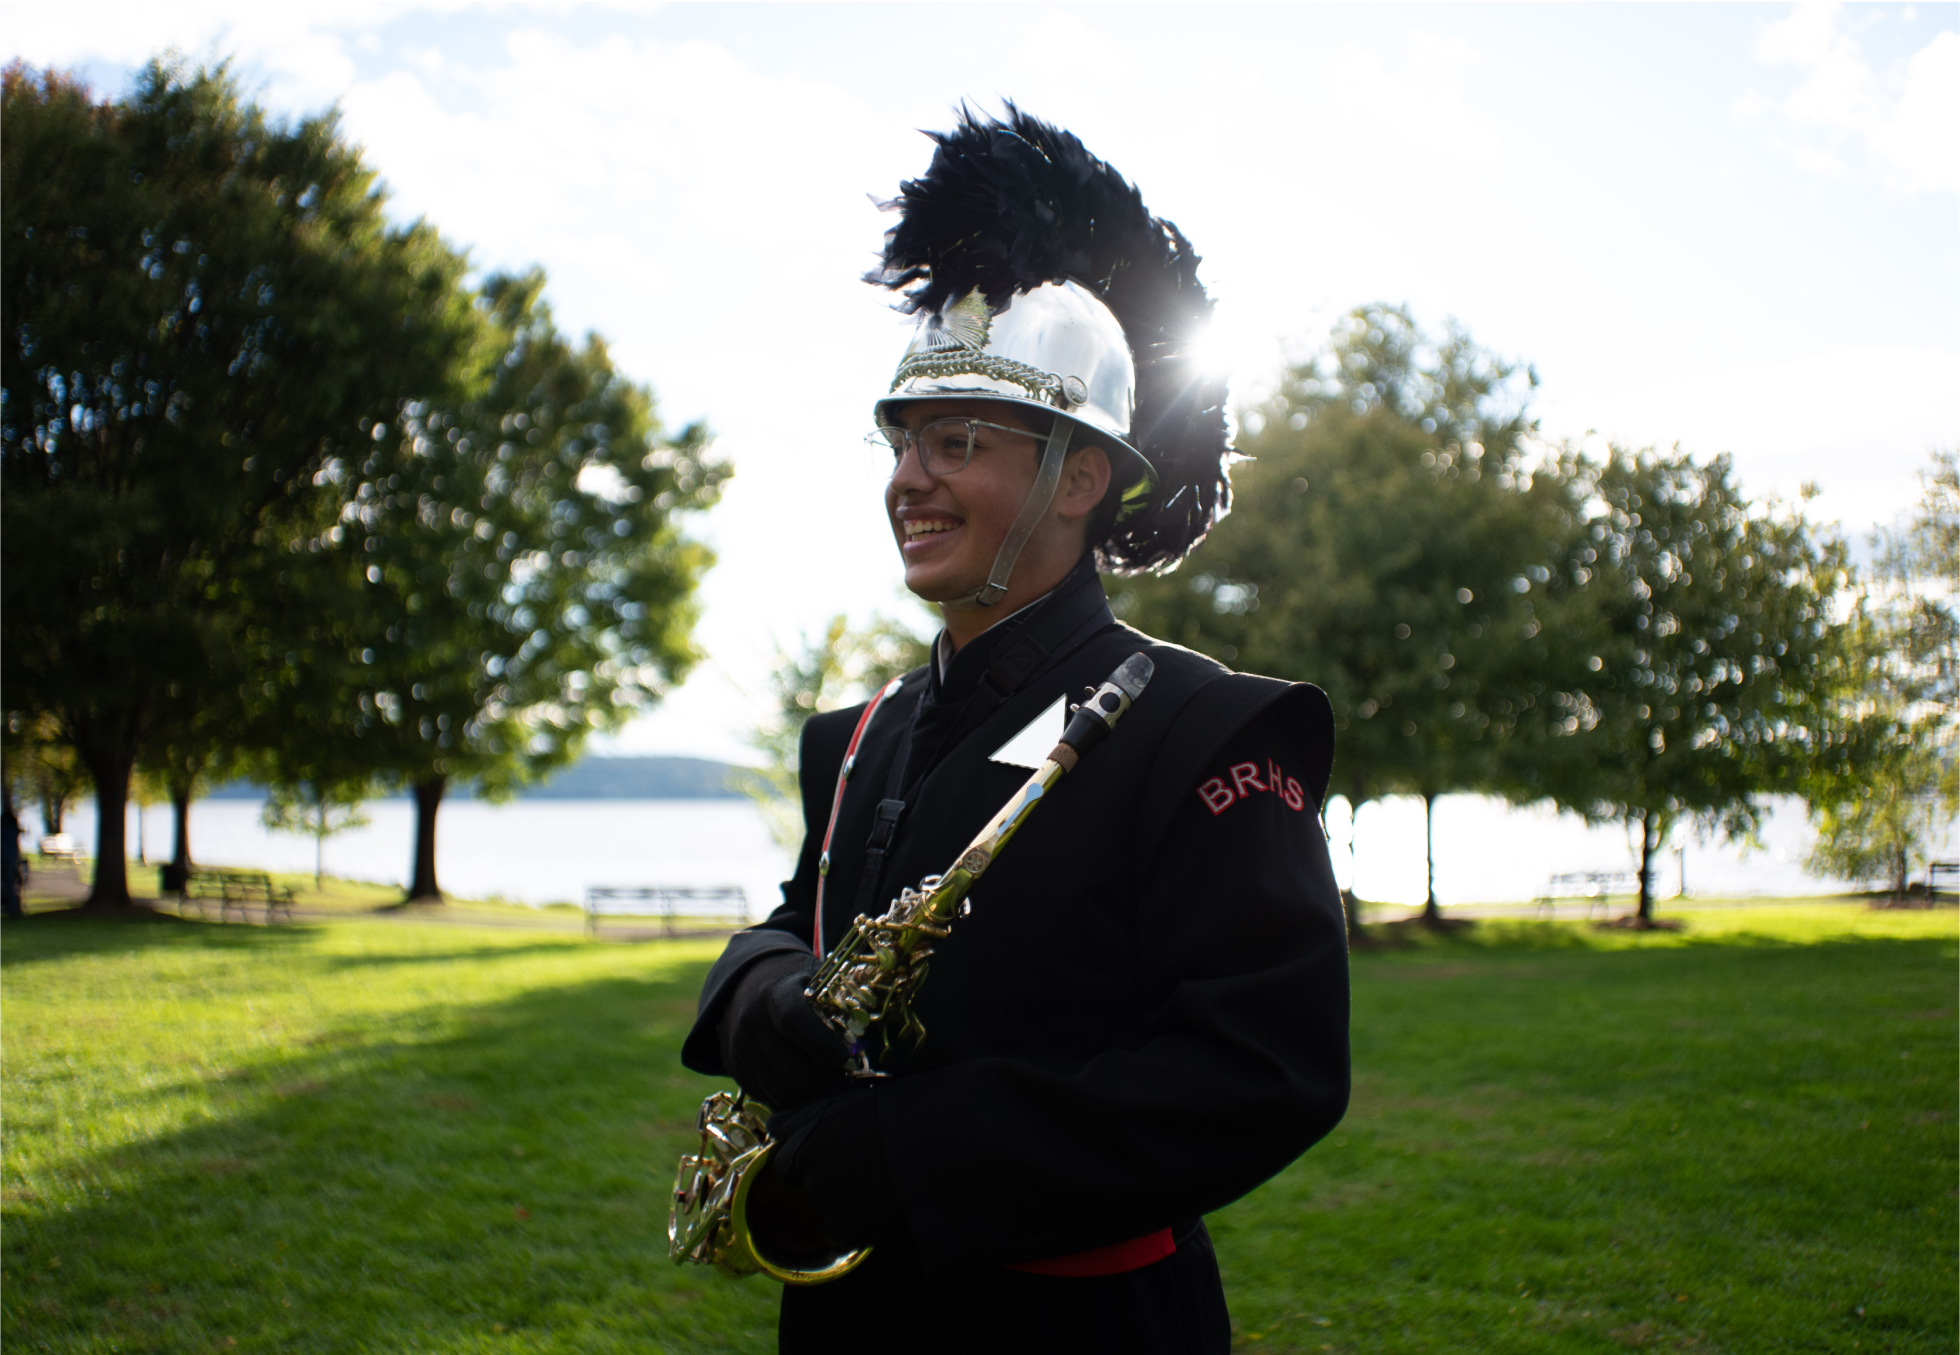 Diego Catalan dressed in his marching band uniform looks to the left as the sun sets behind him.